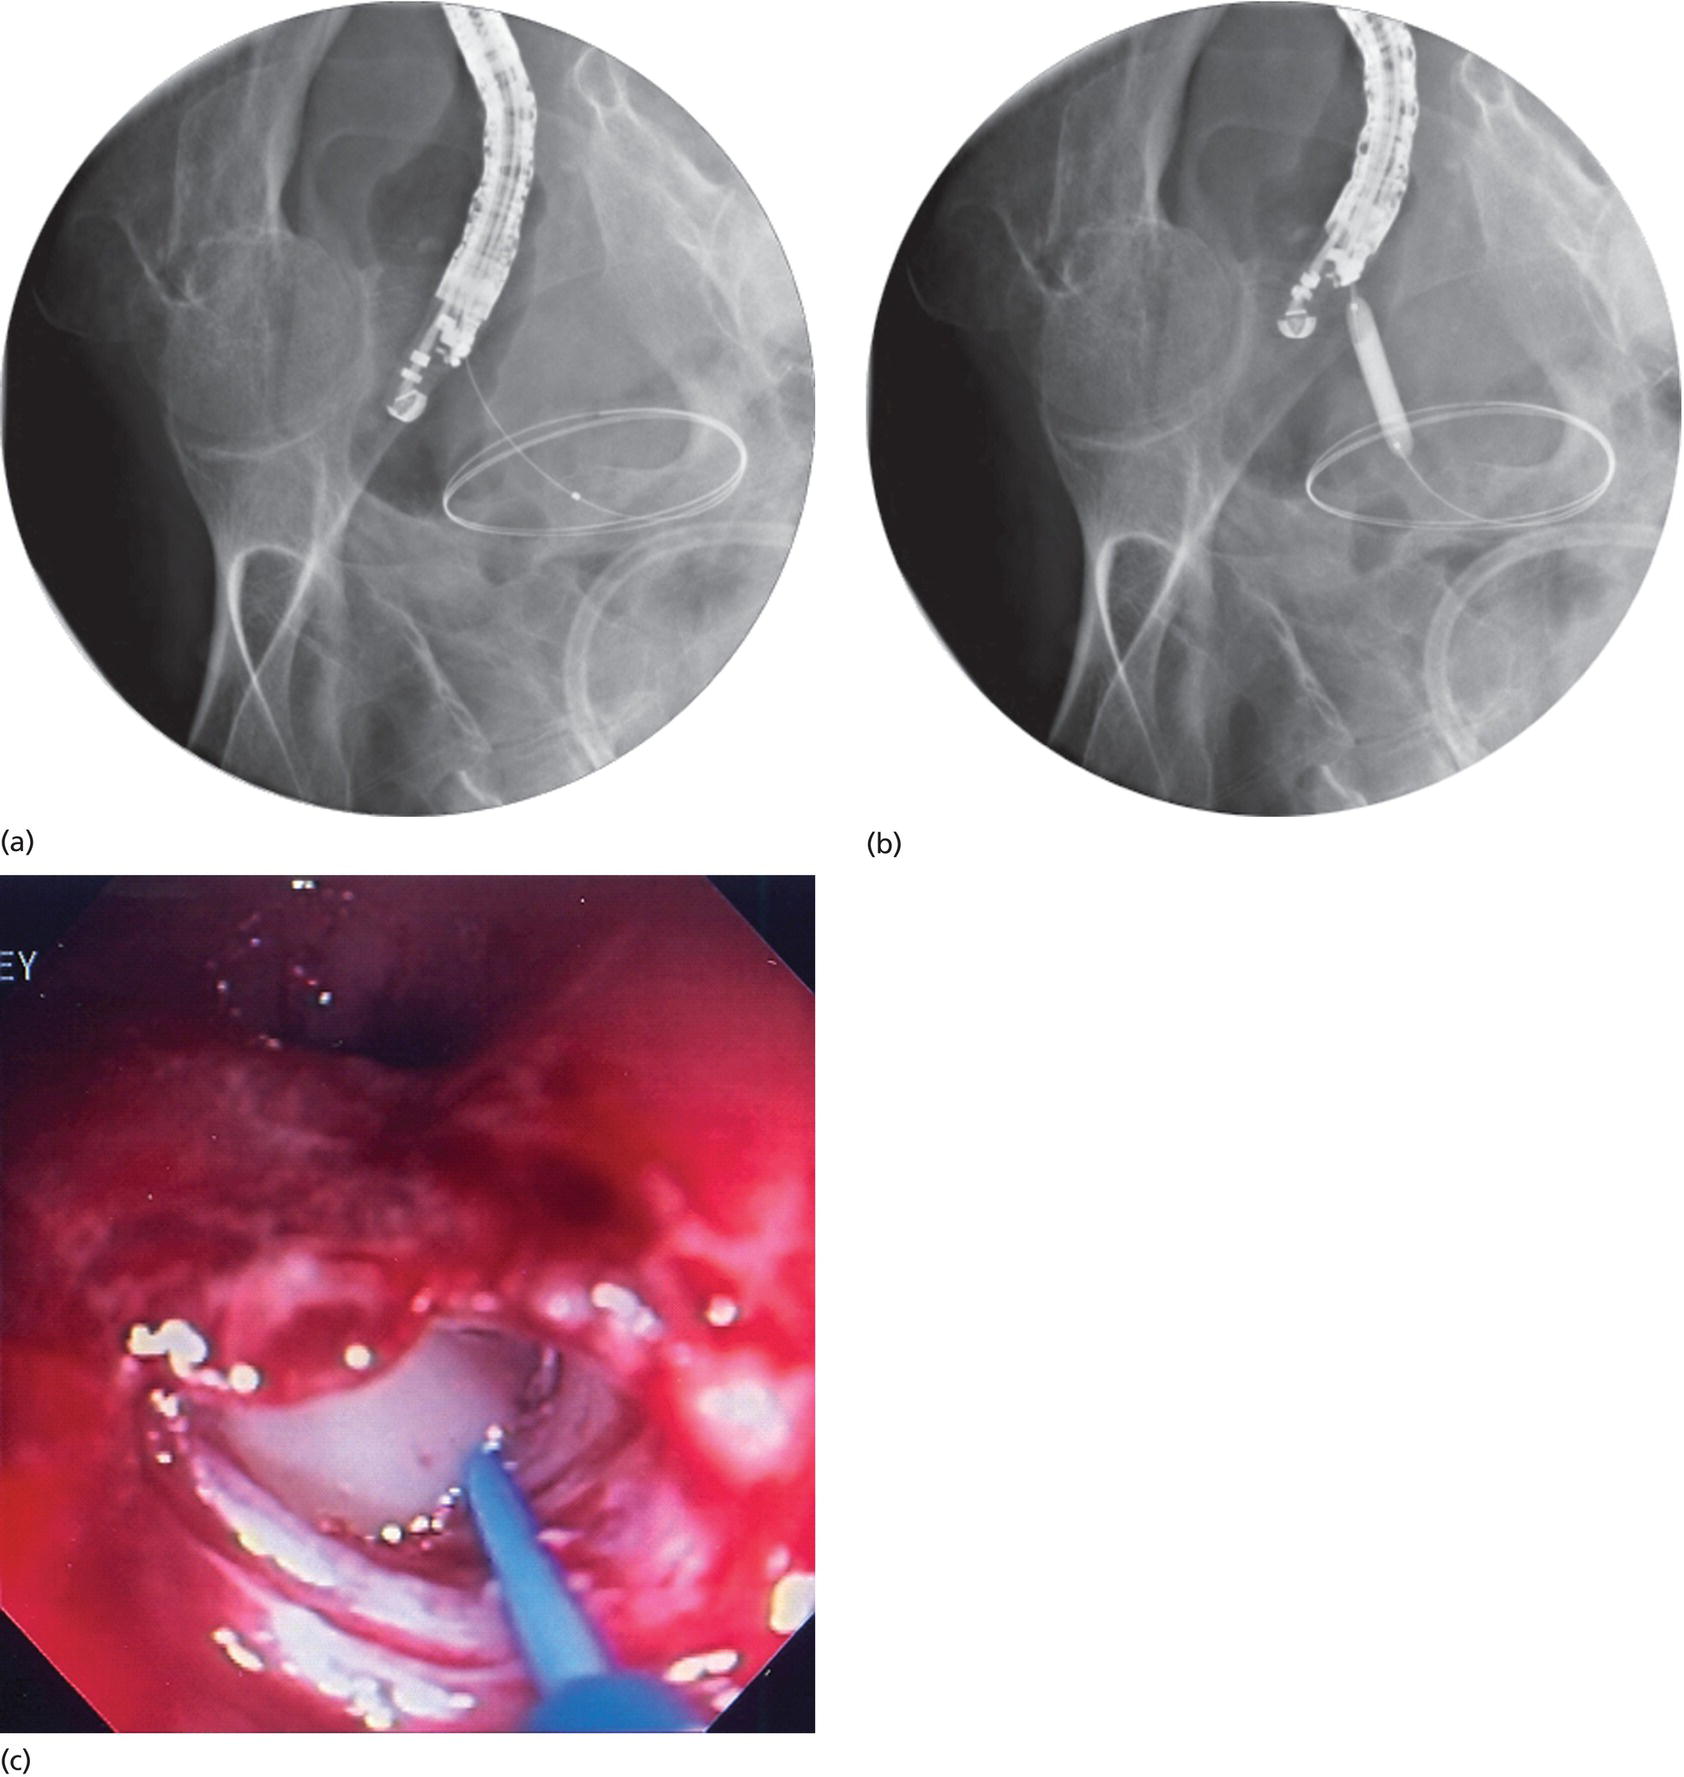 Photos depict fluoroscopy view revealing dilation of the tract using an endoscopic retrograde cholangiopancreatography (ERCP) cannula (a) and then an over-the-wire balloon dilator (b). Pus is seen to extrude following dilation of the transmural tract (c).